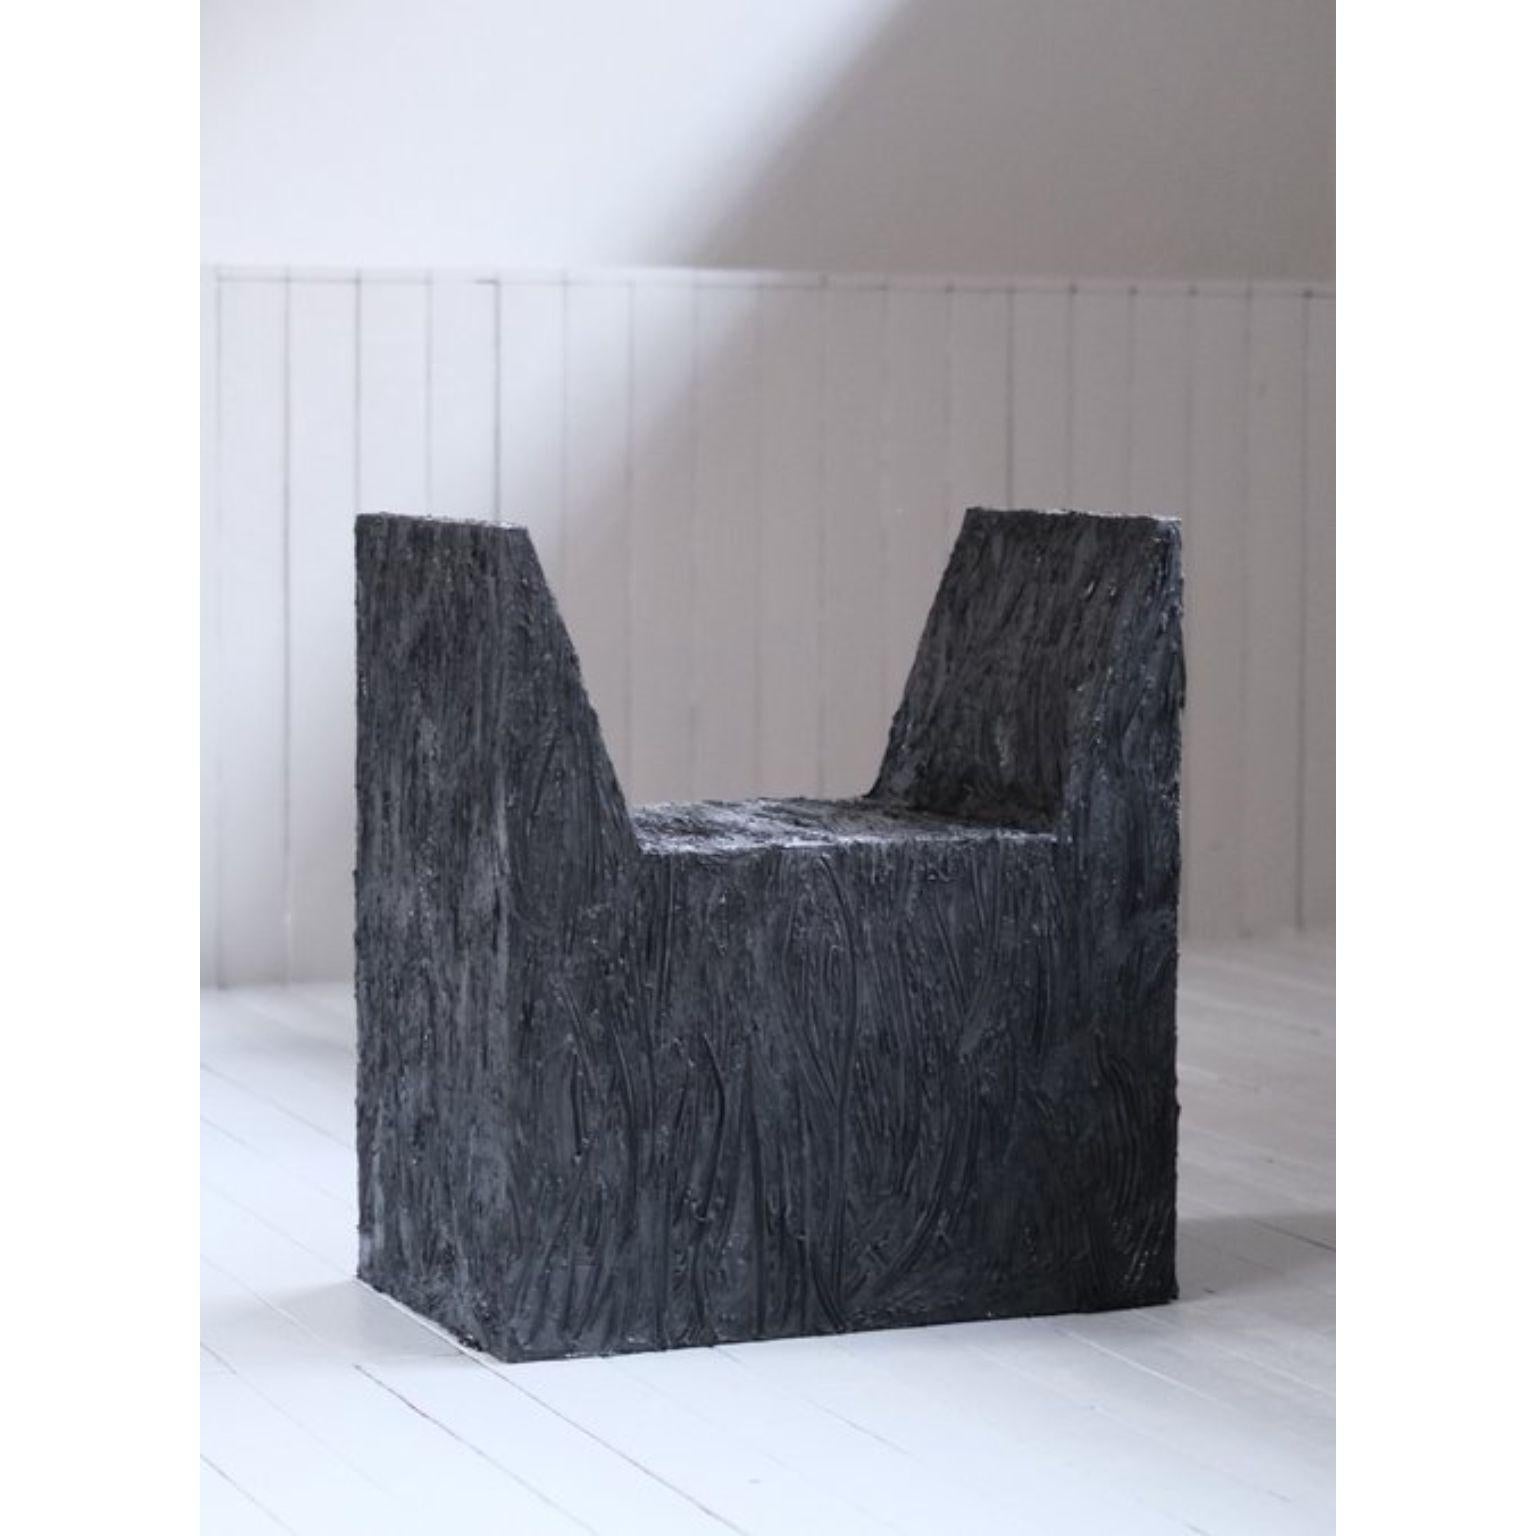 AD Rubber Stool Small by Arno Declercq
Dimensions: D 38 x W 63 cm x H 69 cm.
Materials: Foam and rubber.

Arno Declercq
Belgian designer and art dealer who makes bespoke objects with passion for design, atmosphere, history and craft. Arno grew